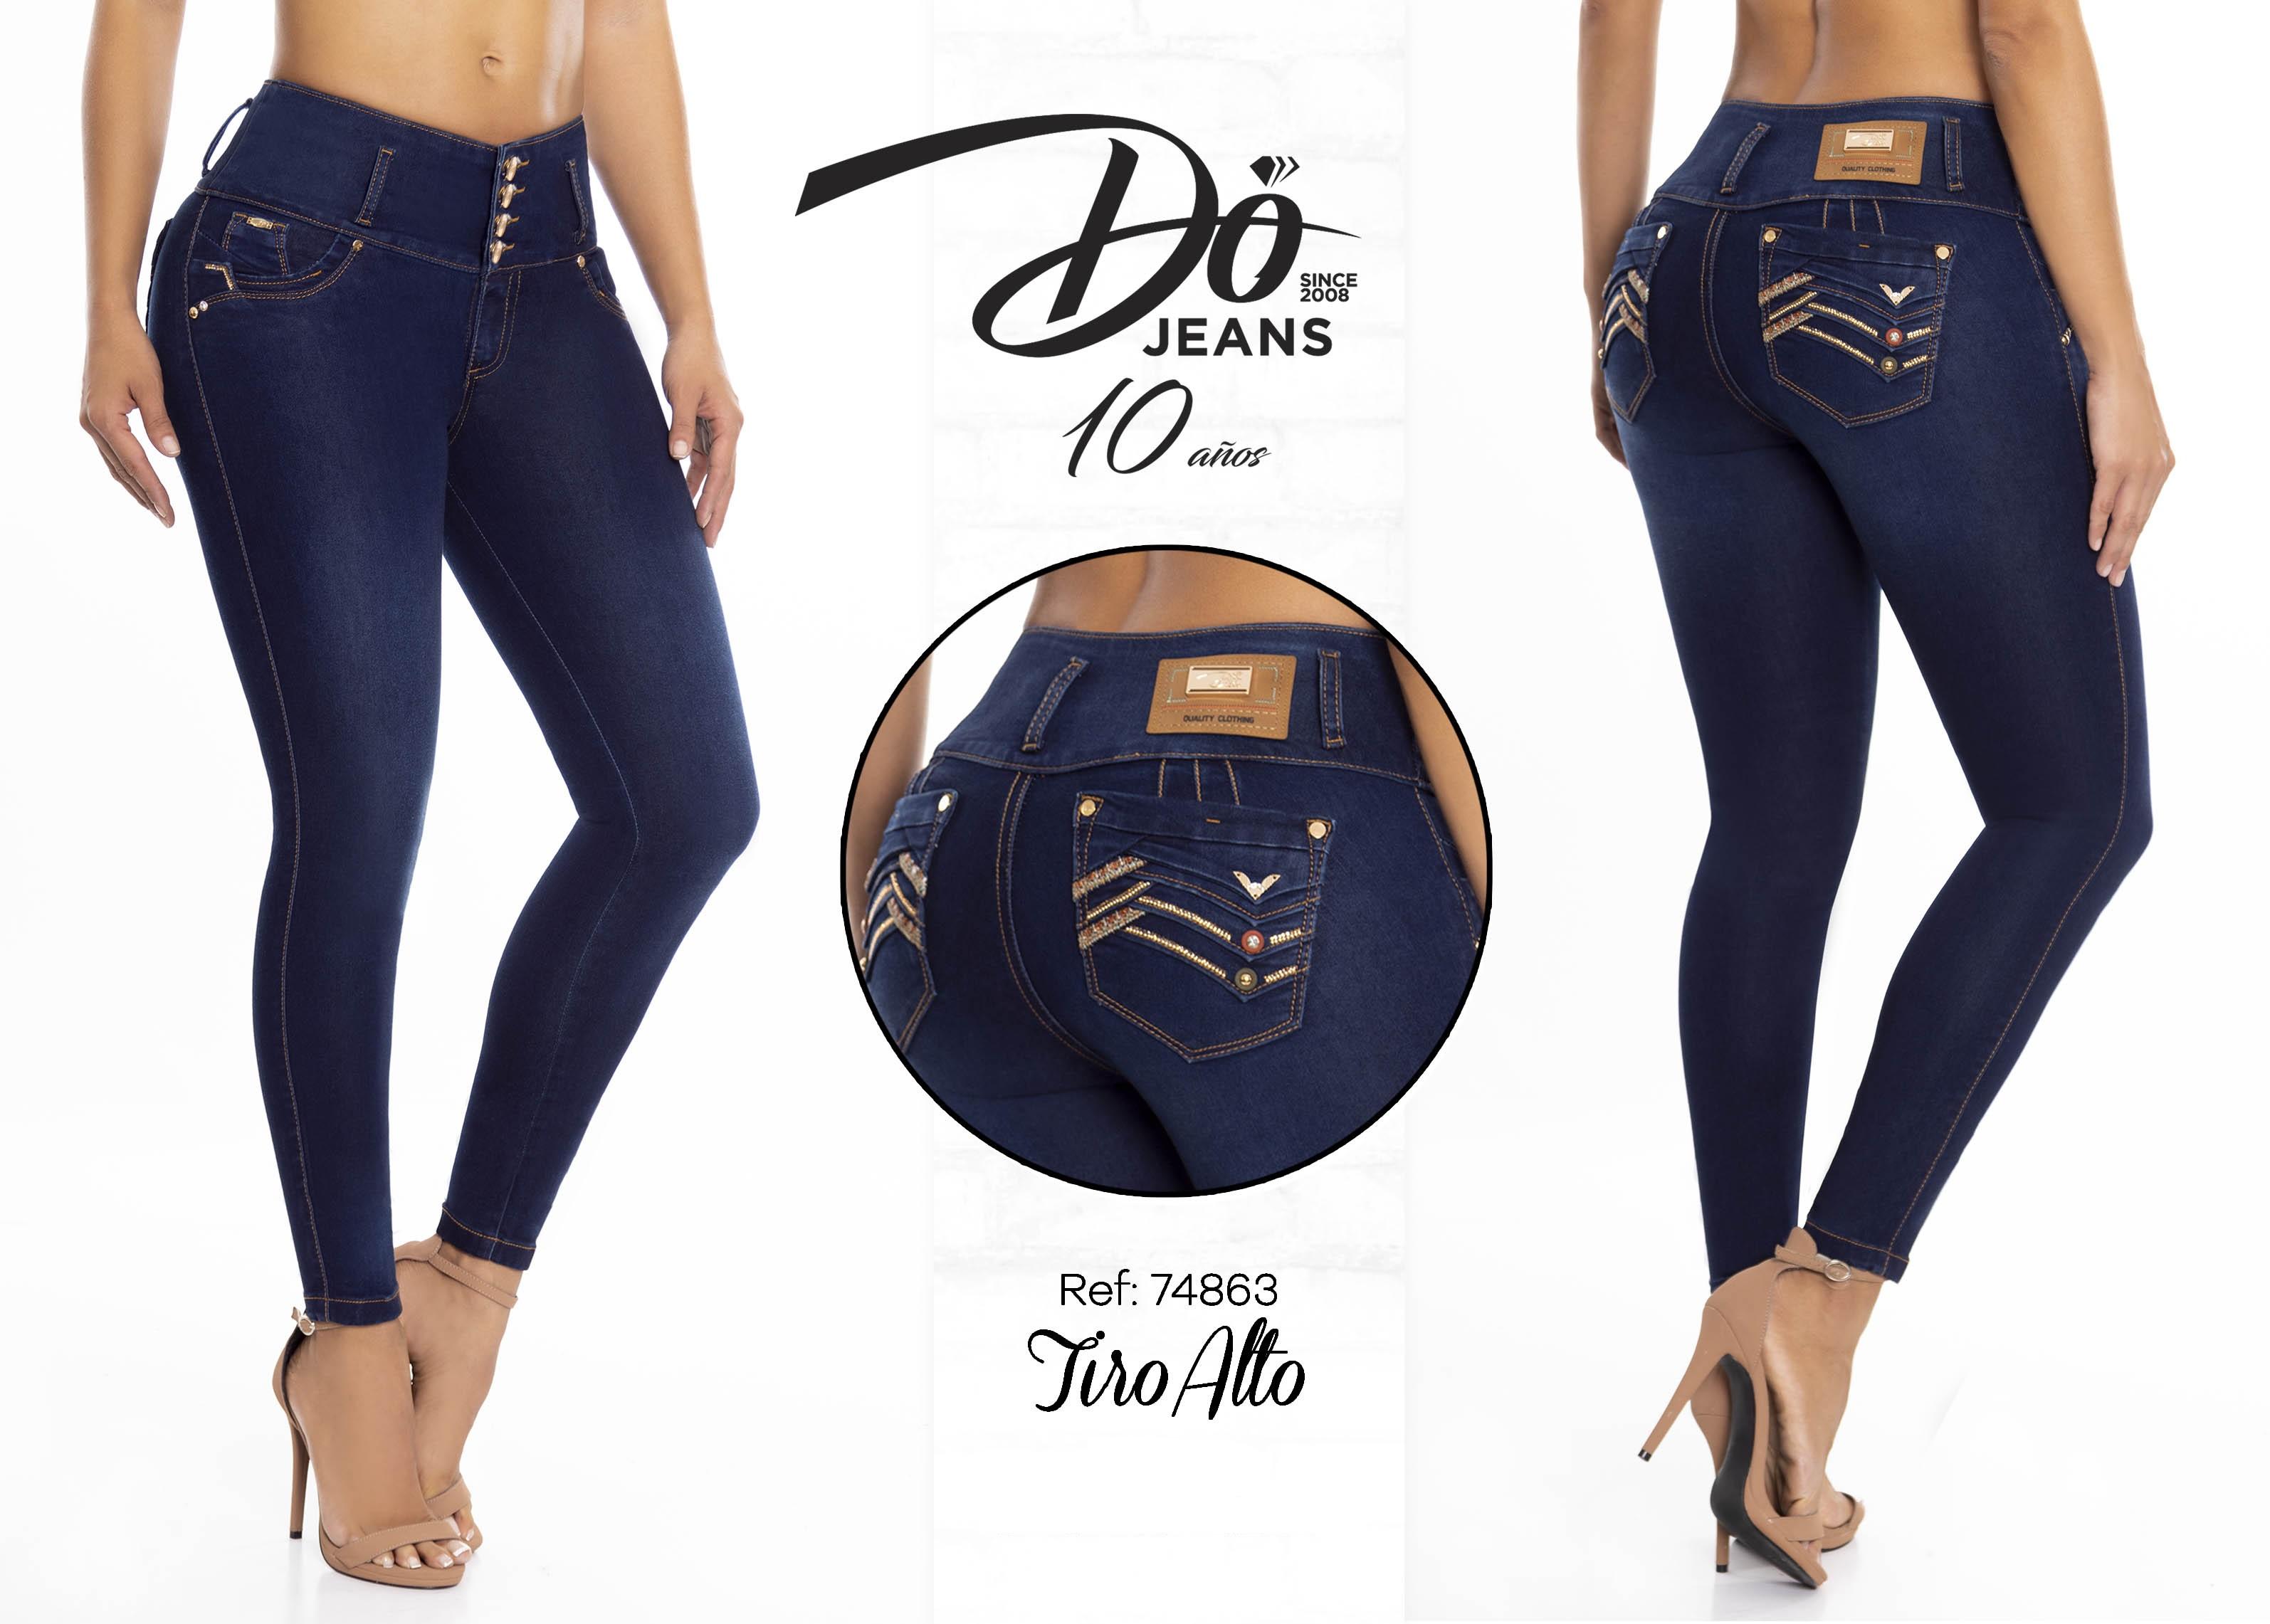 Jeans Levantacola Colombiano - Ref. 248 -74863 D